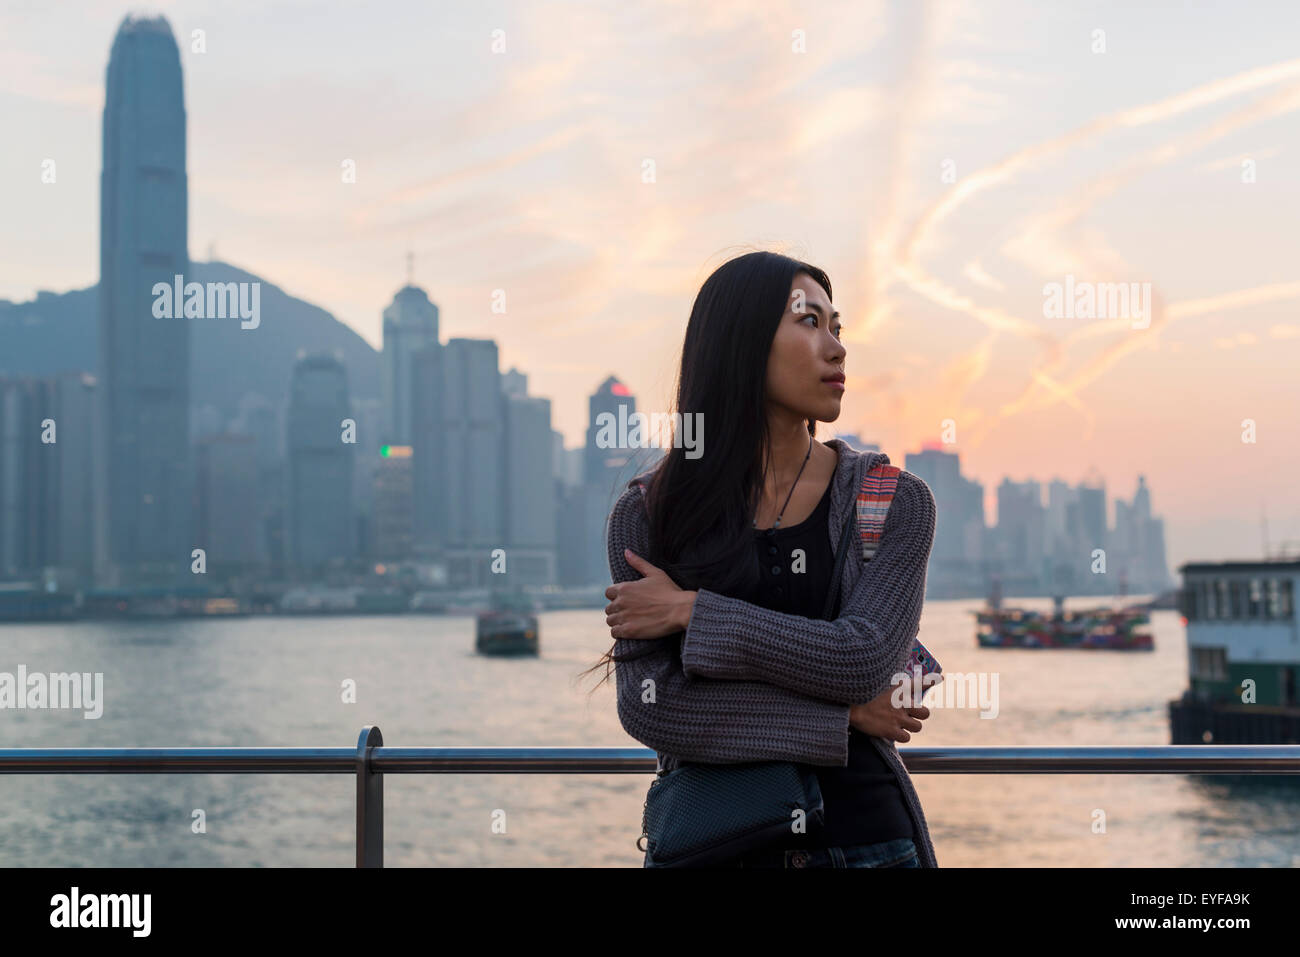 A young woman at the waterfront with a view of the skyline at sunset, Kowloon; Hong Kong, China Stock Photo